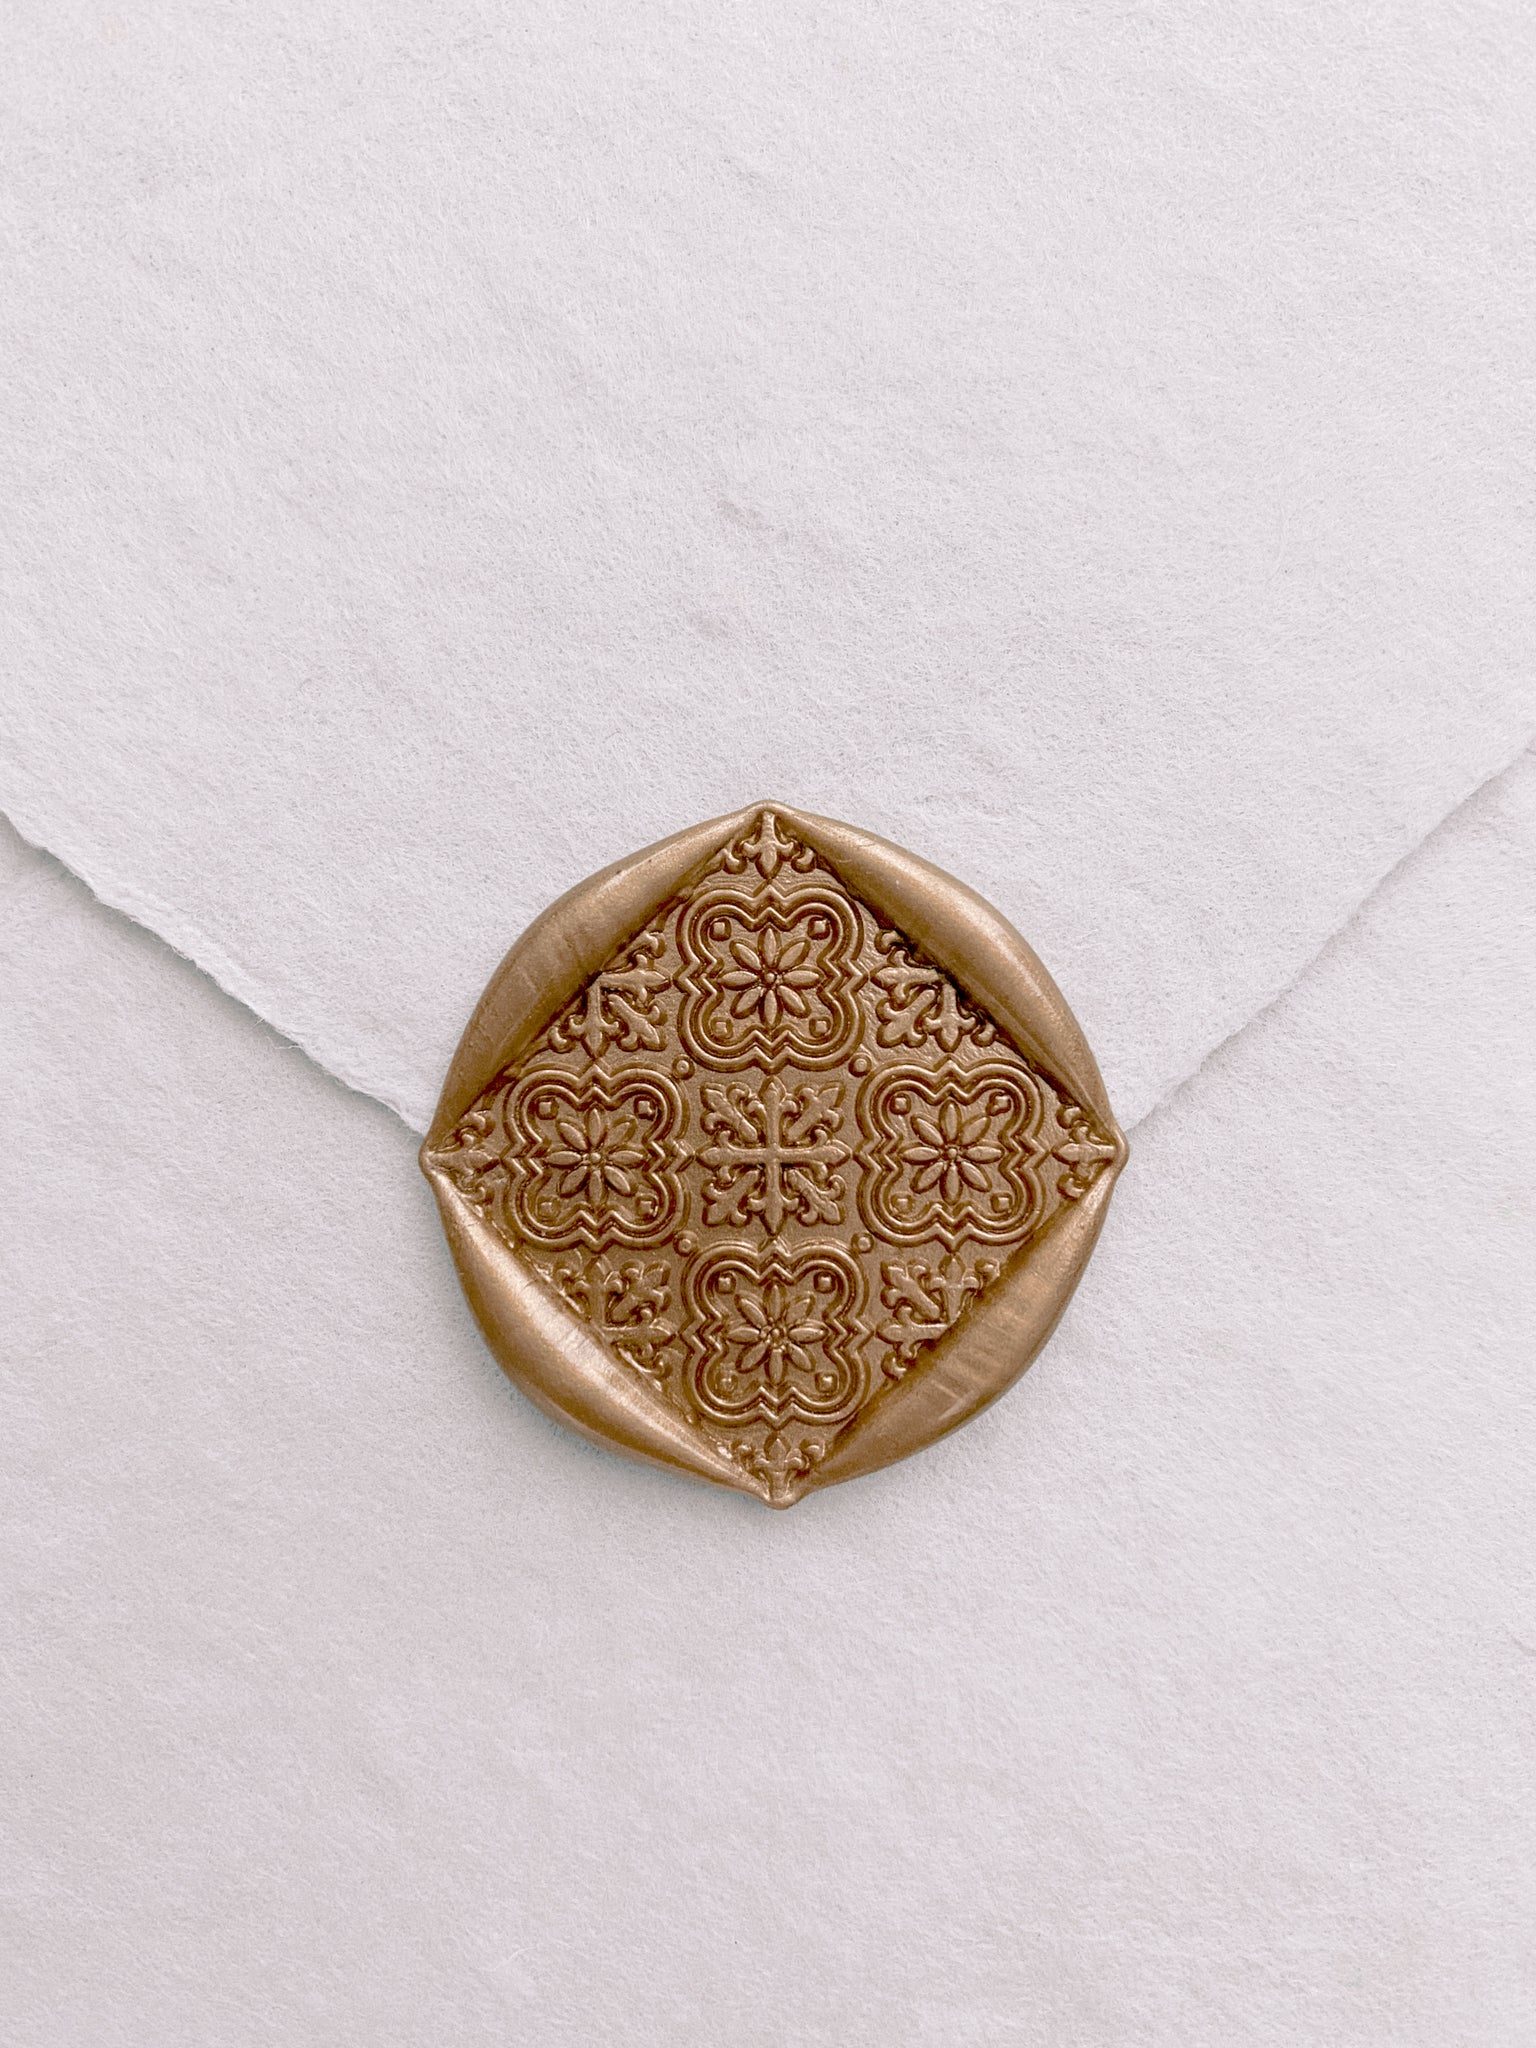 Moroccan tile pattern square shaped wax seals in gold on handmade paper white envelope_front angle